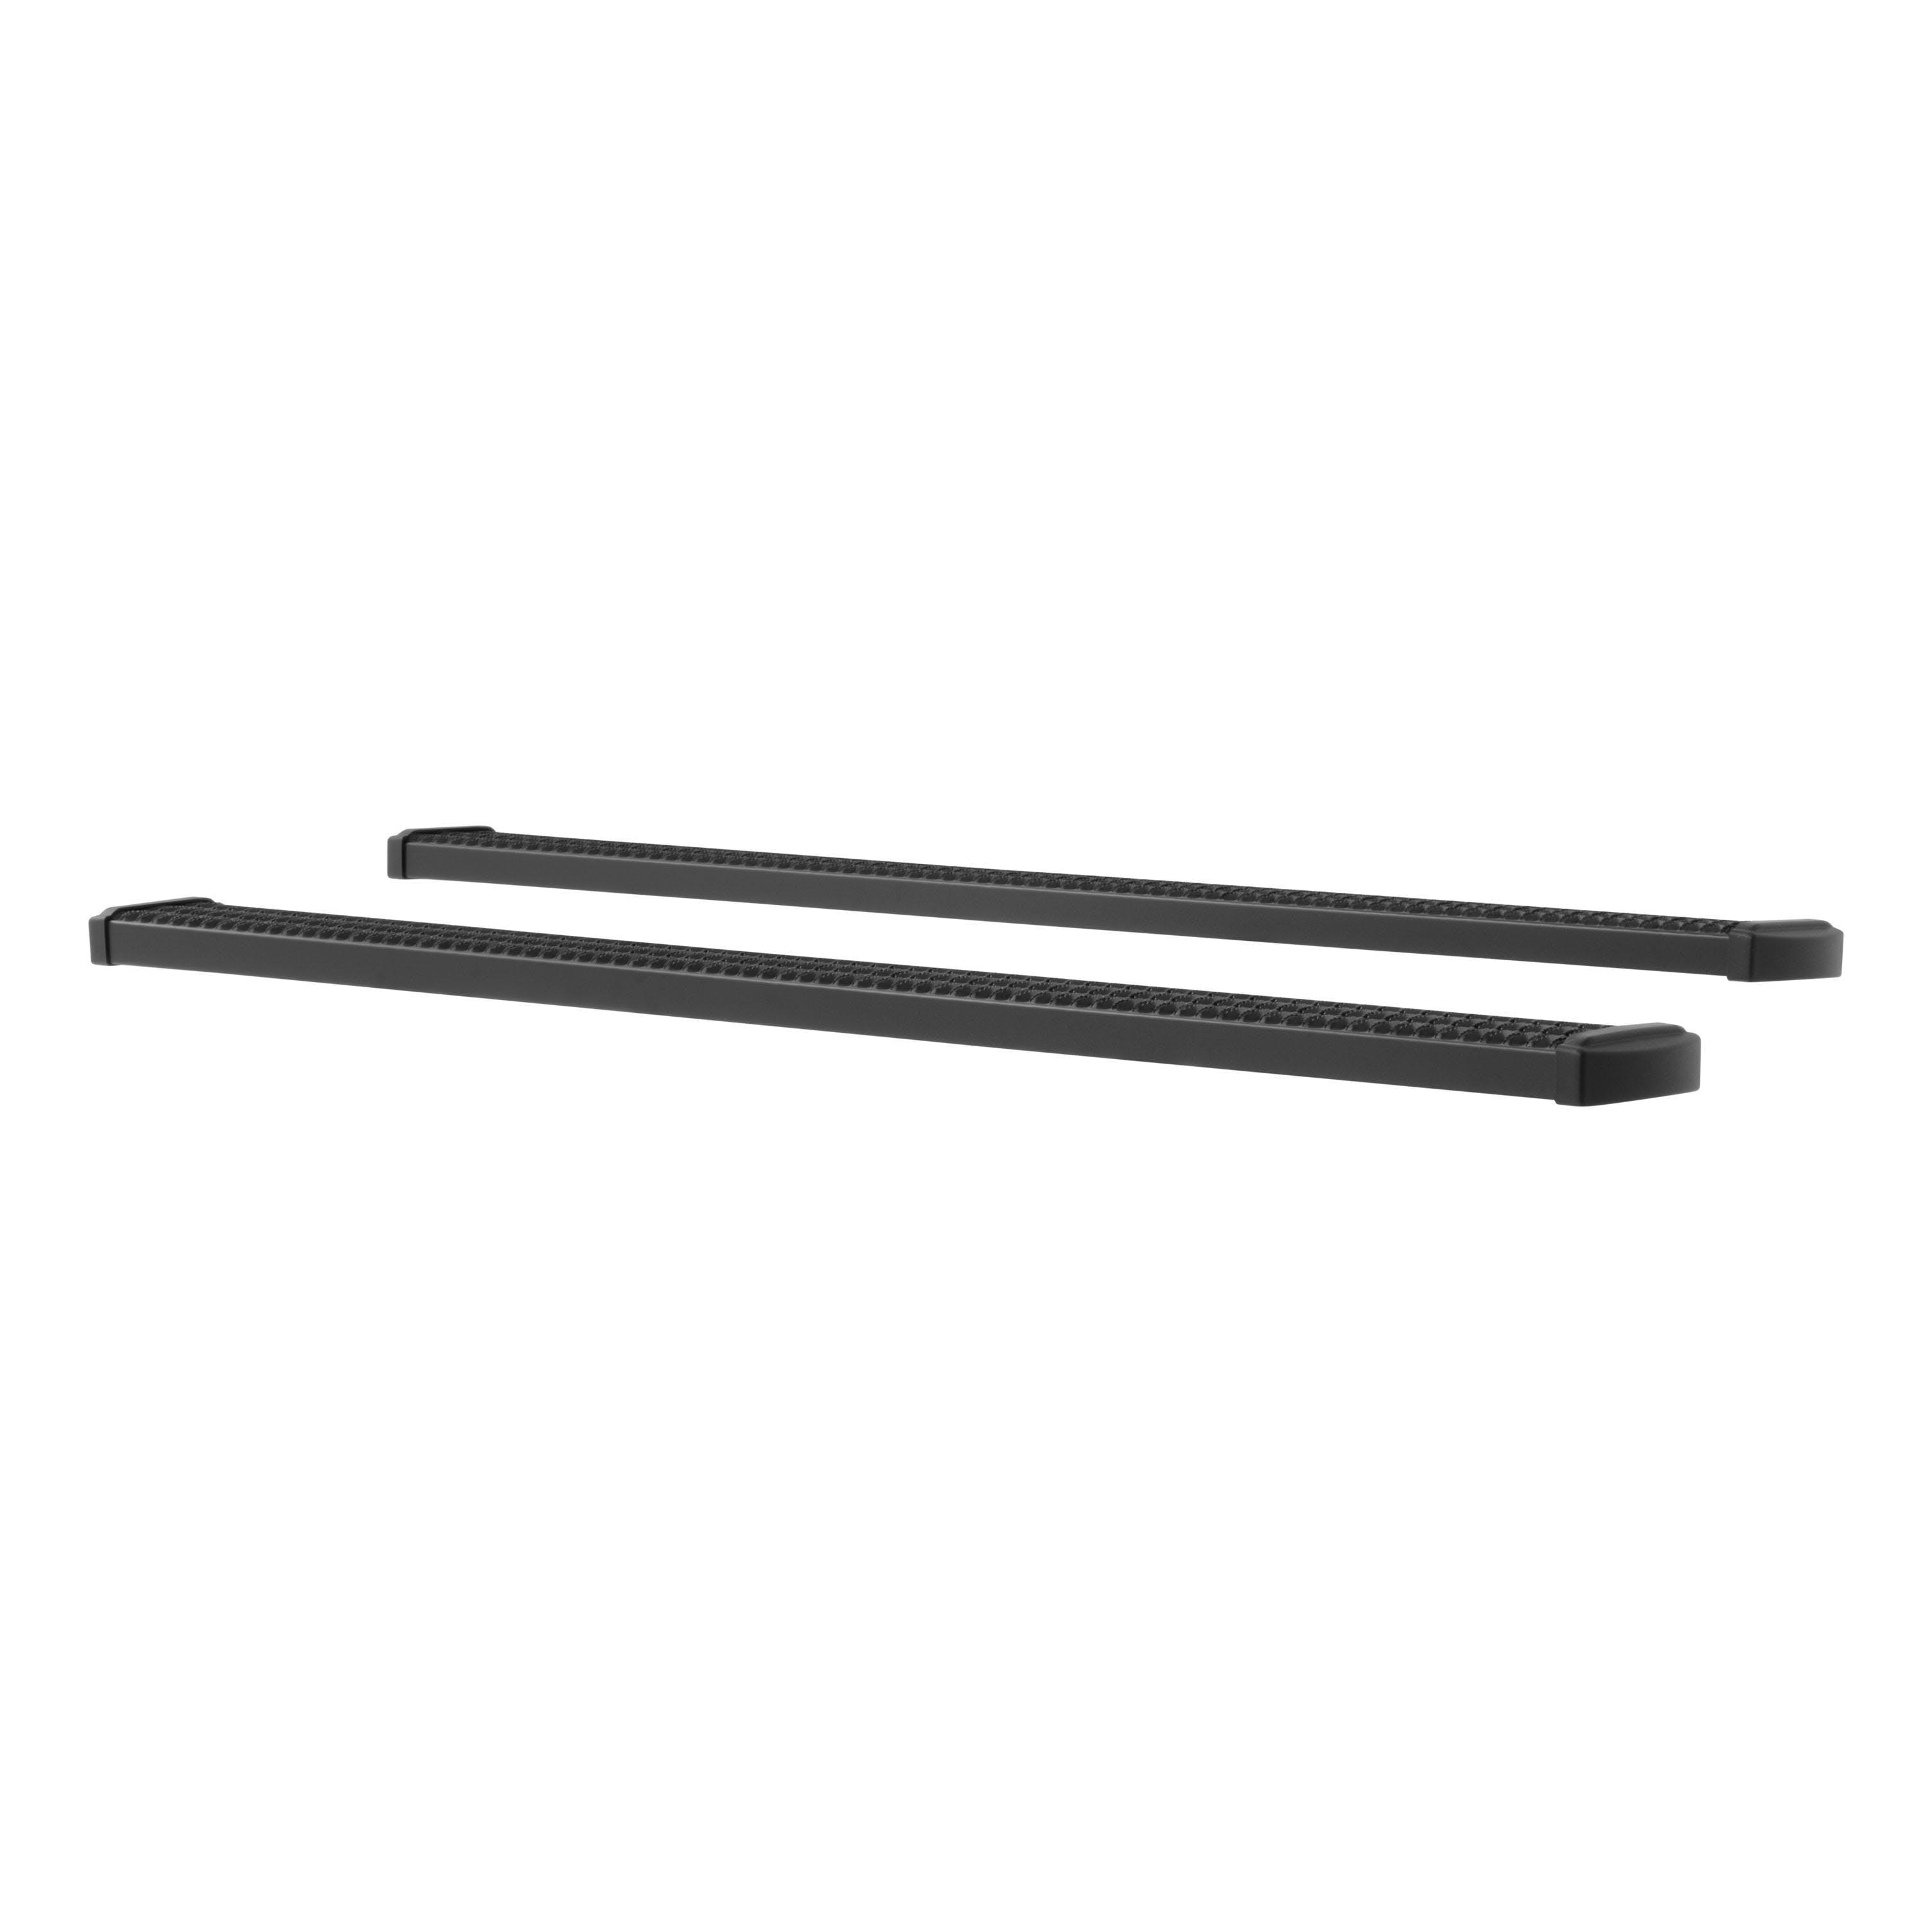 LUVERNE 415088-401117 Grip Step 7 inch Running Boards